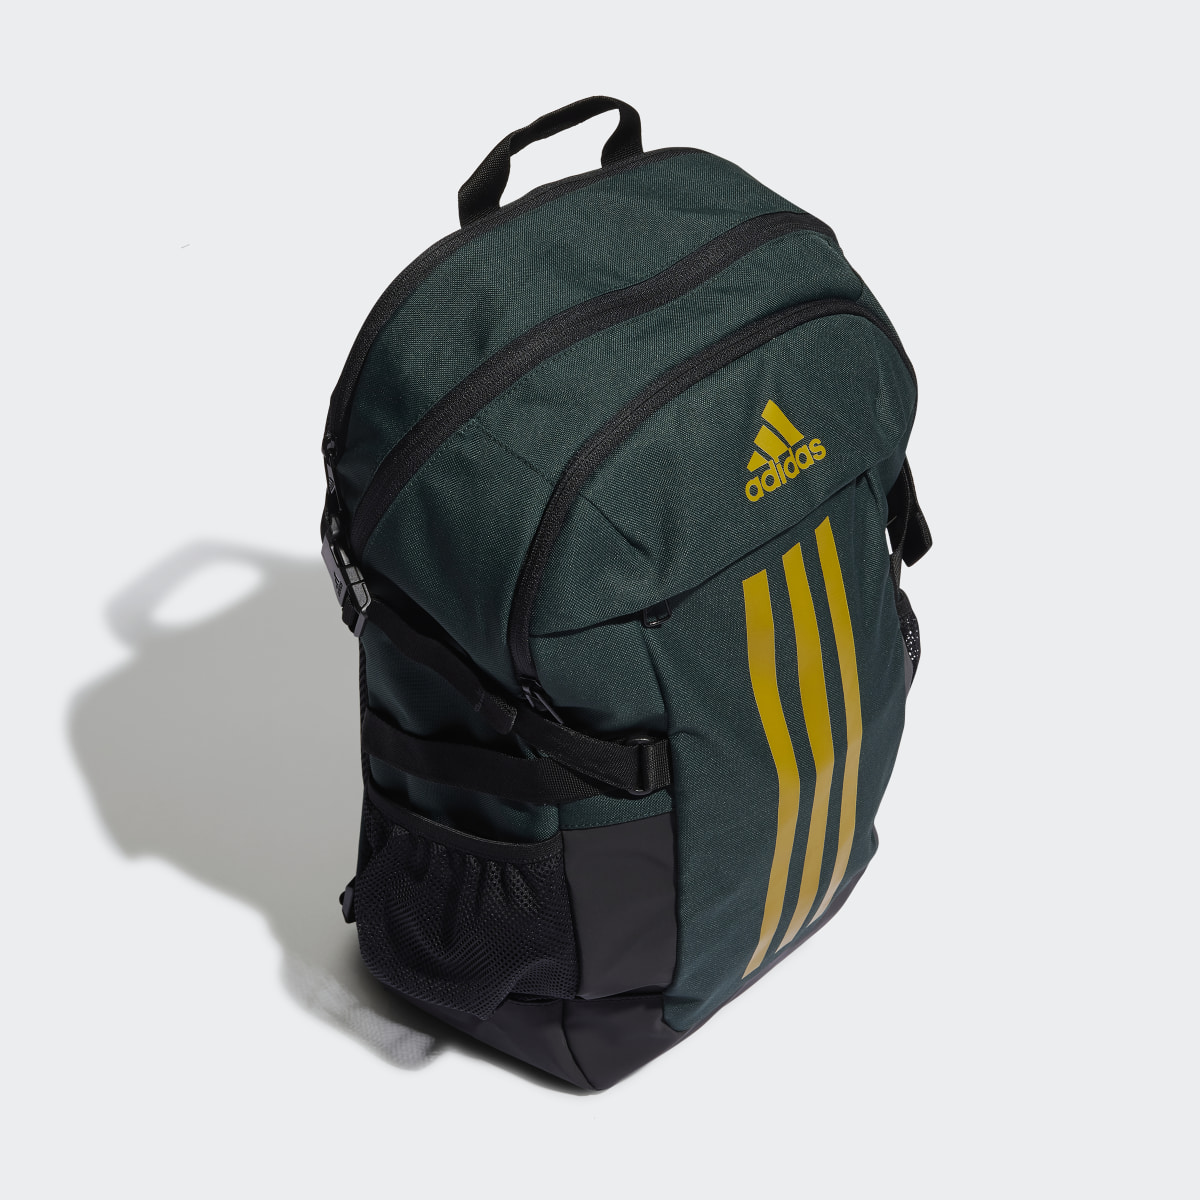 Adidas Power Backpack. 4